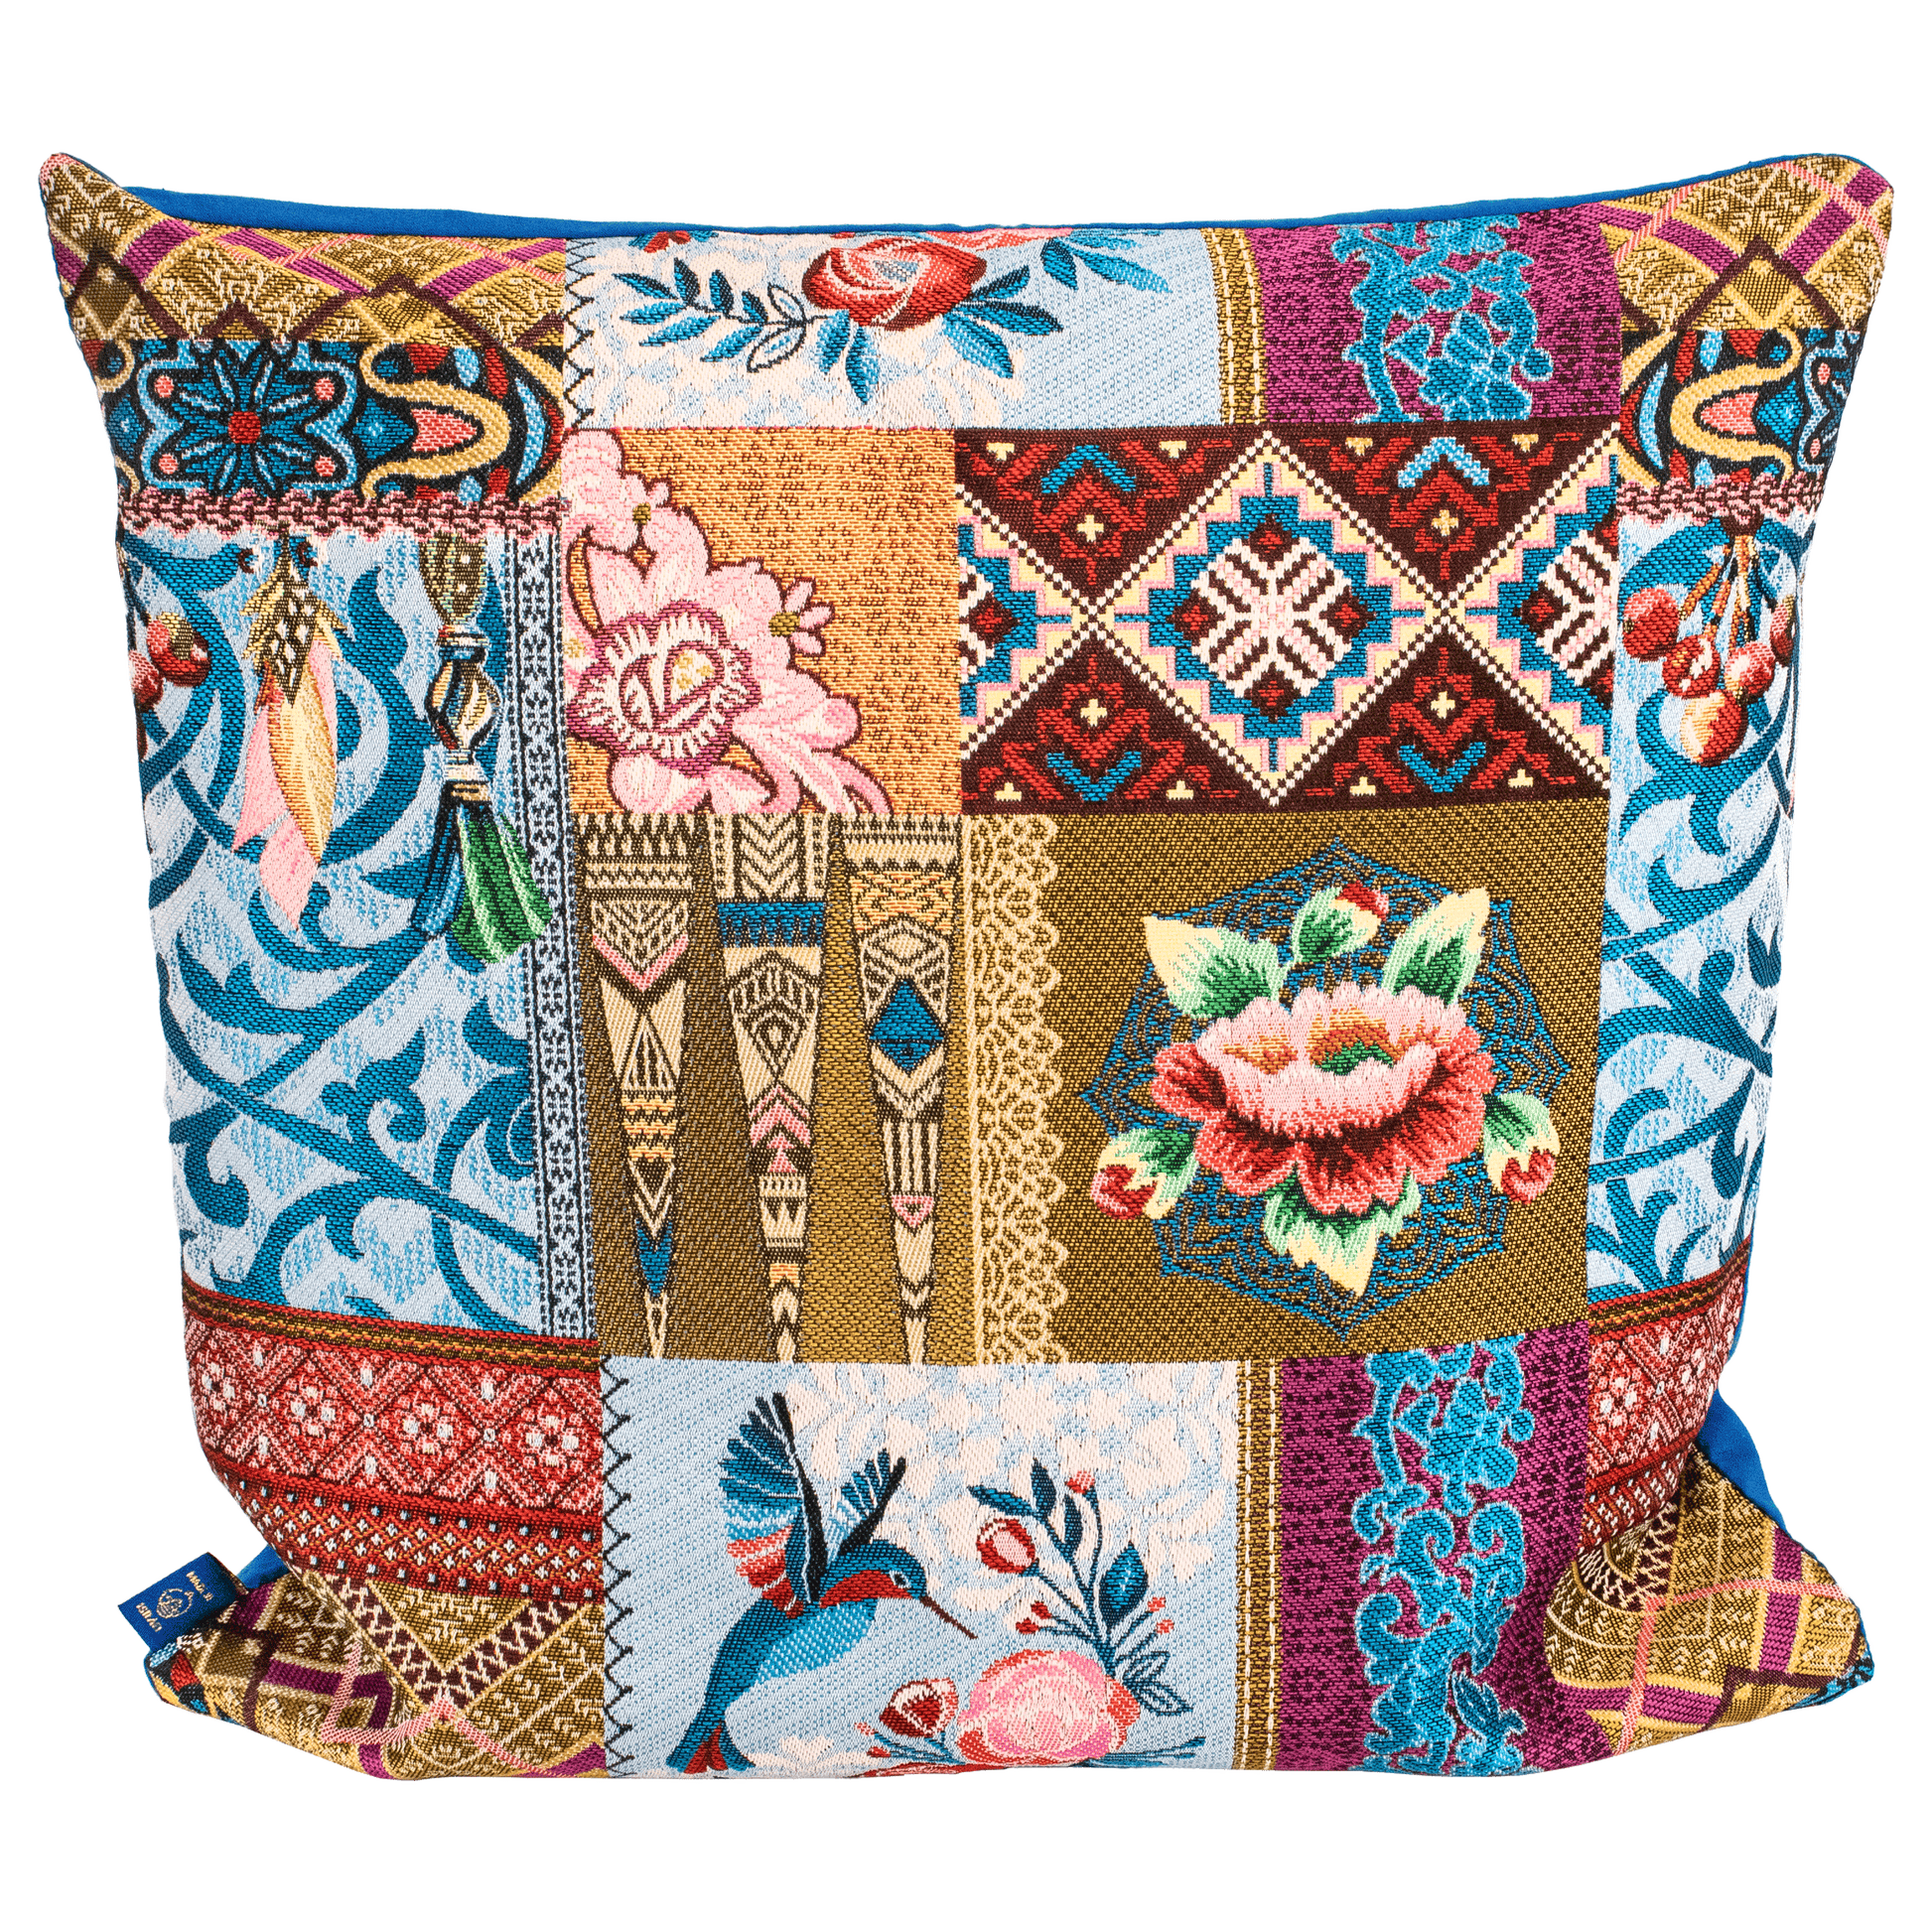 Multi-pattern patchwork pillow case with blue, gold and fuchsia colorway